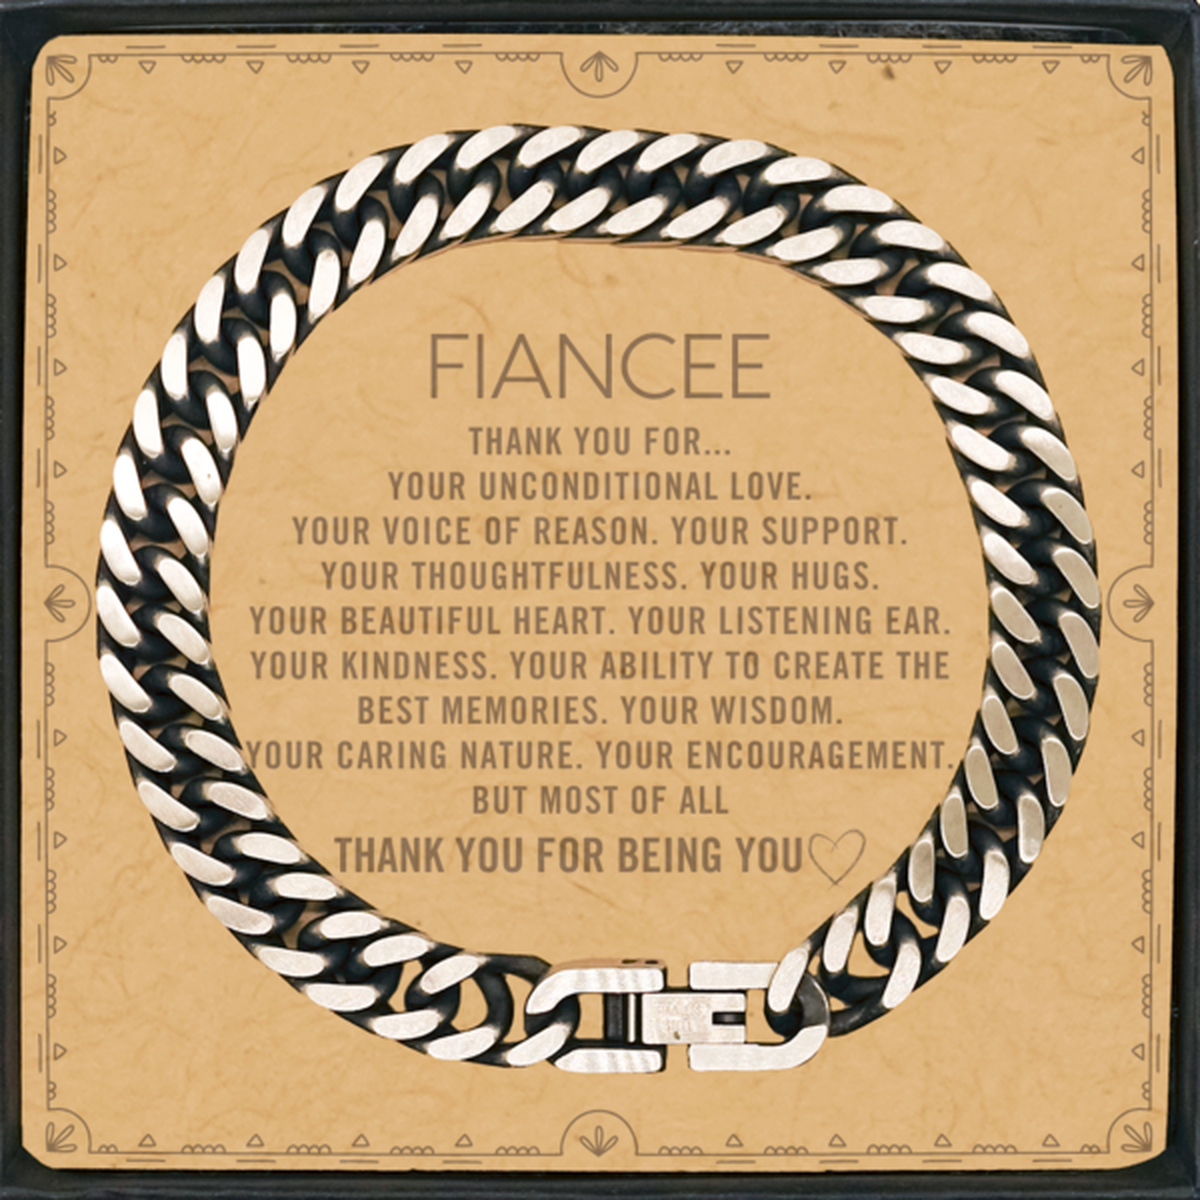 Fiancee Cuban Link Chain Bracelet Custom, Message Card Gifts For Fiancee Christmas Graduation Birthday Gifts for Men Women Fiancee Thank you for Your unconditional love